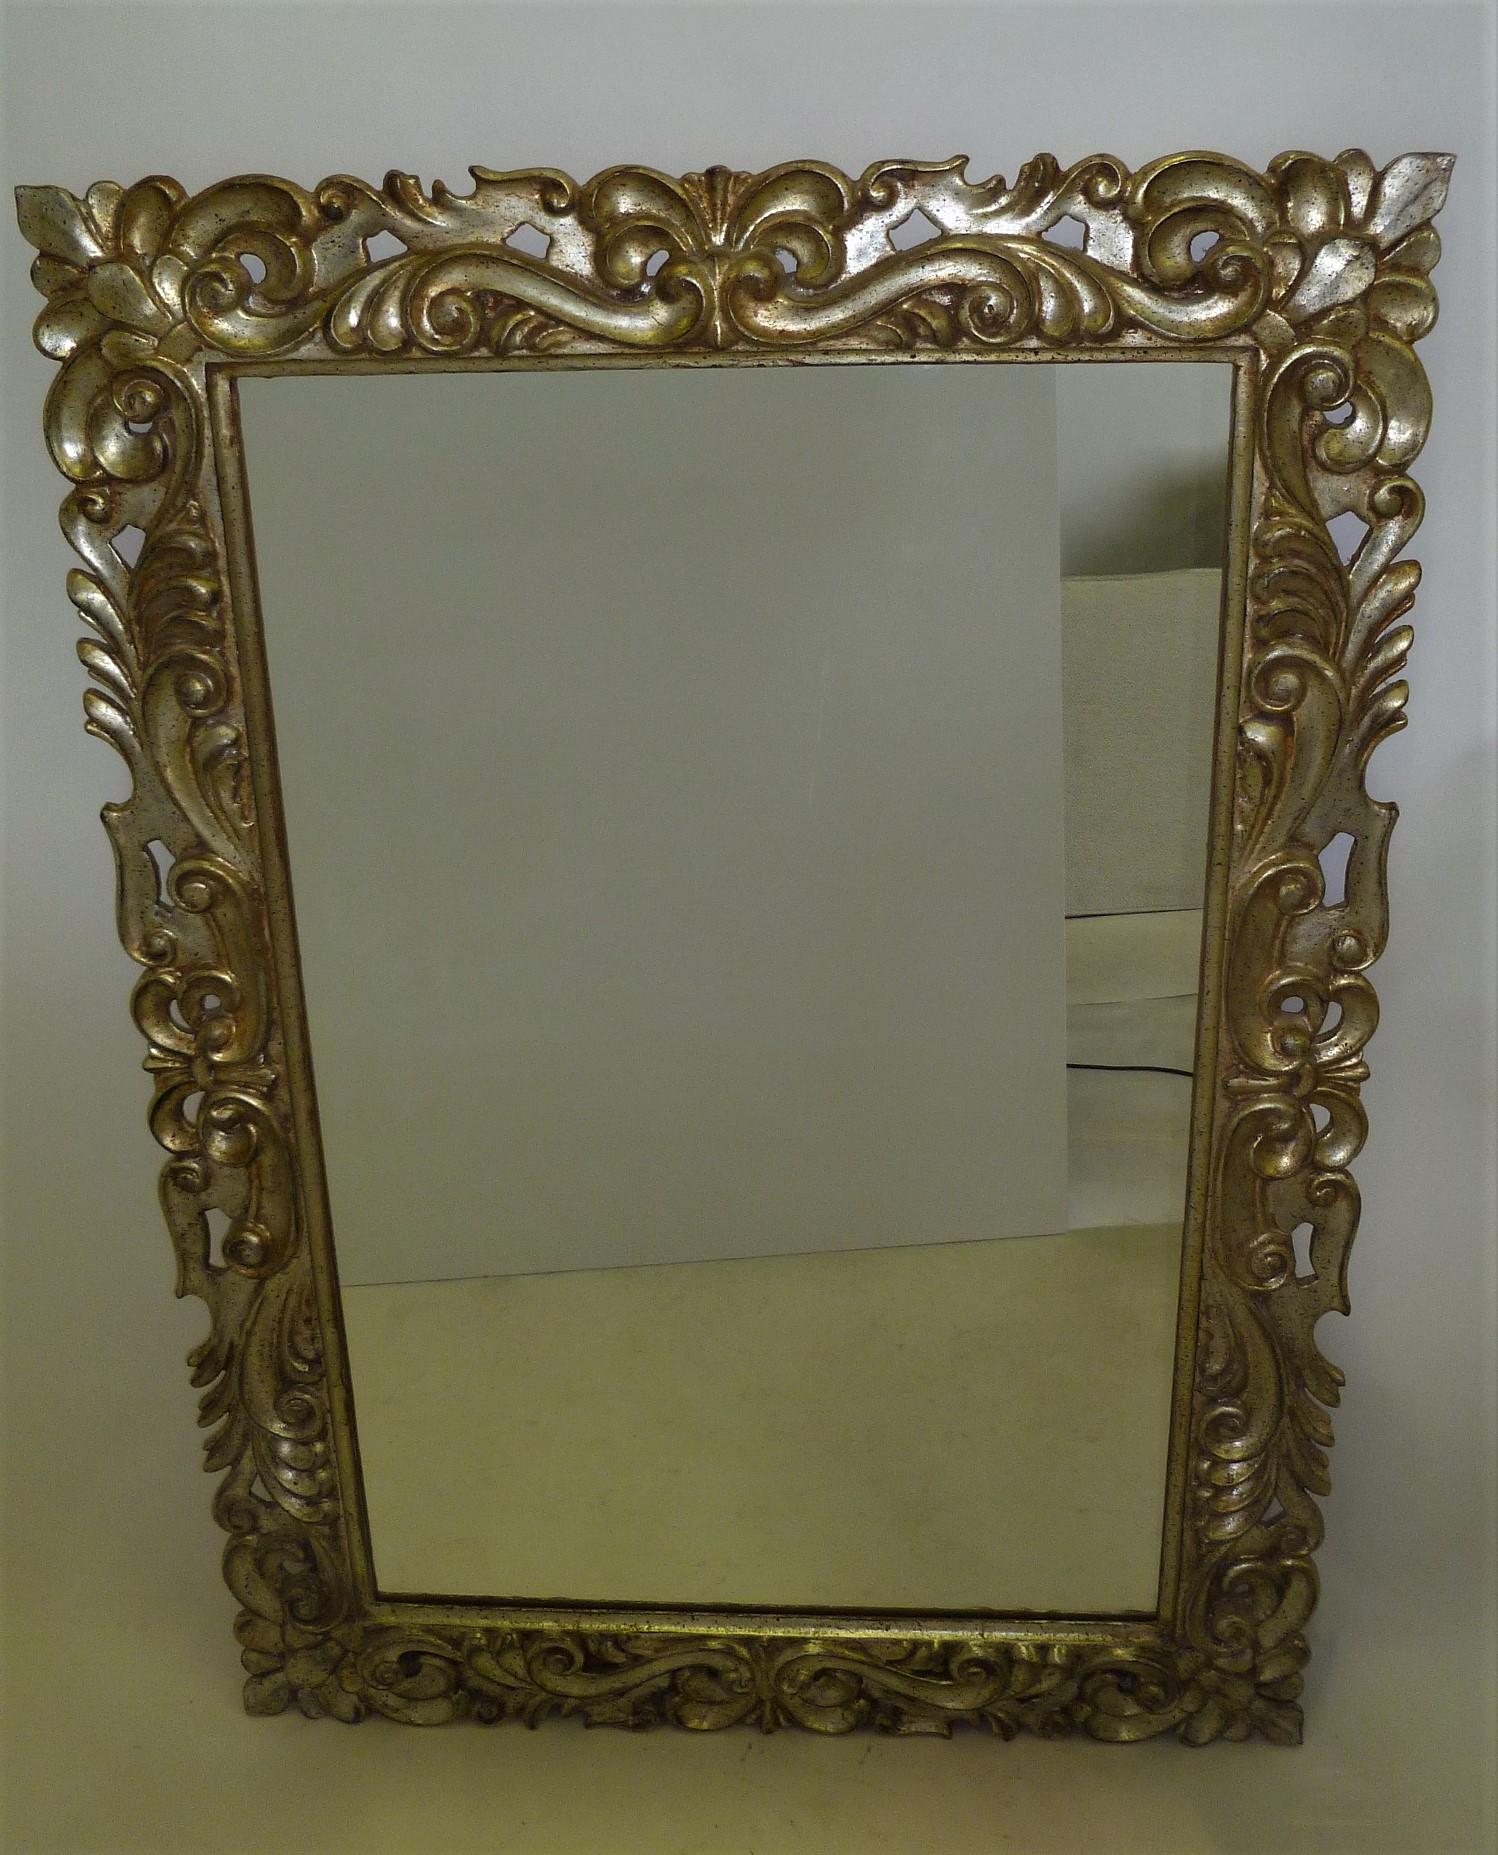 Created in either 1969 or 1970, this silver gilt Florentine style mirror is impressive and very elegant. Carved wood, probably Italian, the mirror glass is American, produced by Gardner Glass in North Wilksboro, North Carolina (marked on the reverse